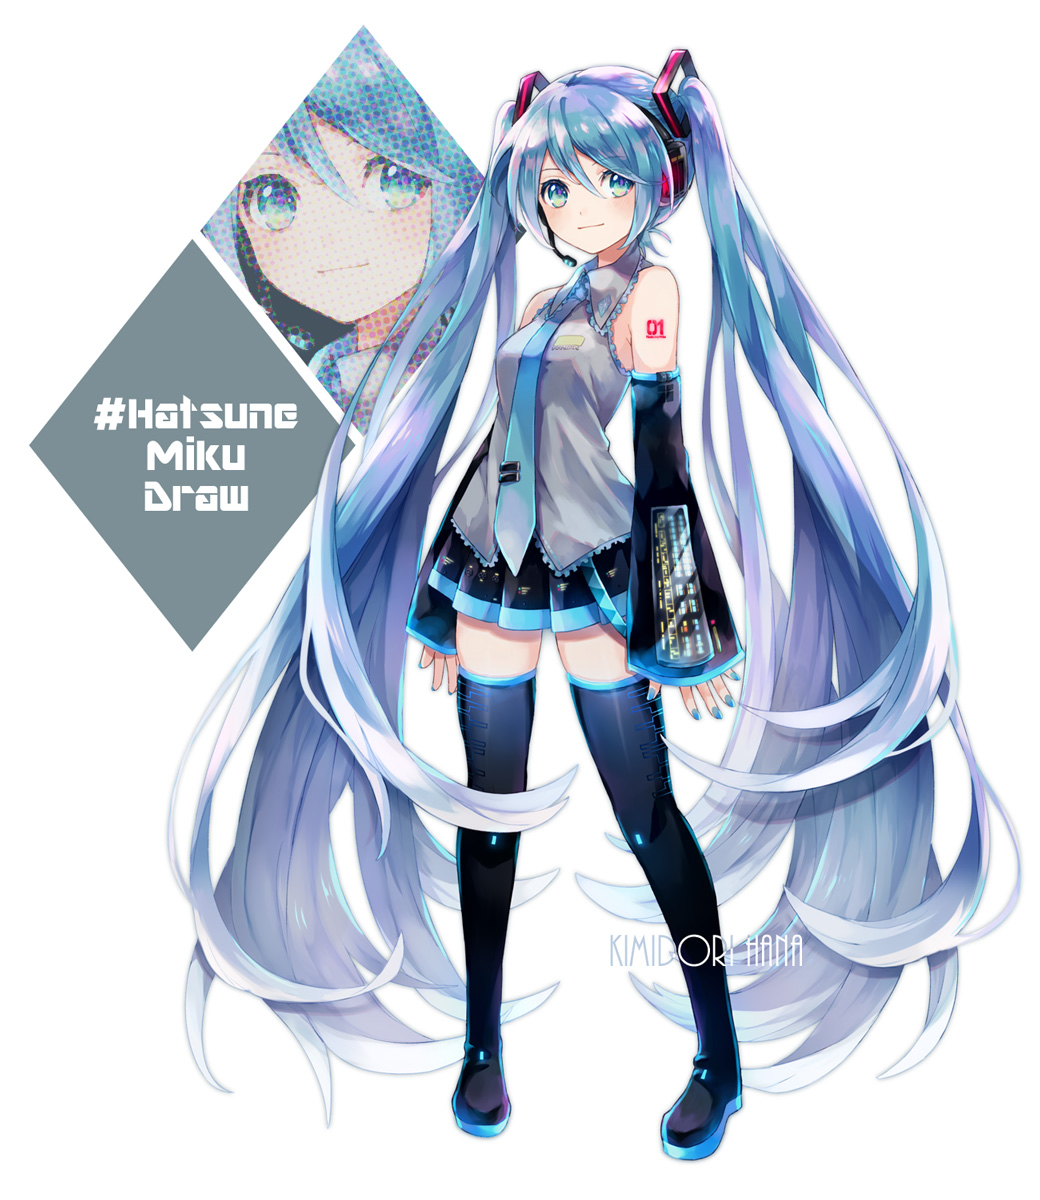 1girl aqua_nails artist_name bangs bare_shoulders belt black_legwear black_skirt black_sleeves blue_eyes blue_hair blue_neckwear boots character_name commentary derivative_work detached_sleeves eyebrows_visible_through_hair full_body grey_shirt hair_between_eyes hair_ornament hana_(mew) hashtag hatsune_miku headphones headset highres light_smile long_hair looking_at_viewer miniskirt nail_polish necktie number_tattoo pleated_skirt projected_inset shirt shoulder_tattoo skirt sleeveless sleeveless_shirt solo standing tattoo thigh-highs thigh_boots tie_clip twintails very_long_hair vocaloid vocaloid_boxart_pose white_background